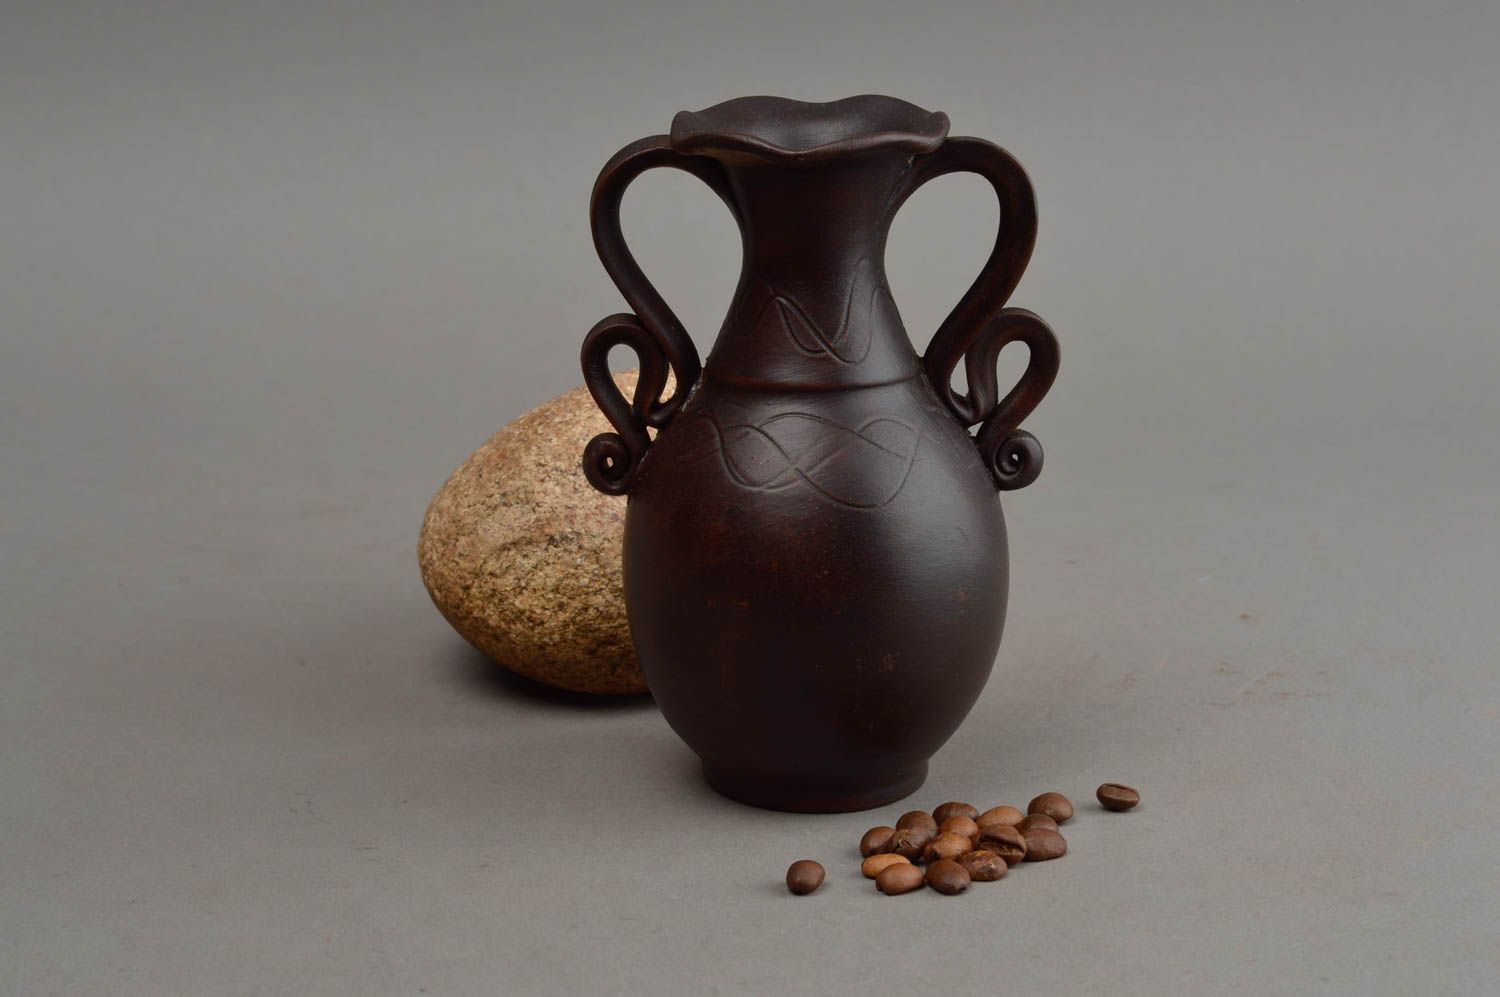 20 oz brown ceramic clay flower vase, wine carafe with two handles 5 inches, 0,5 lb photo 1